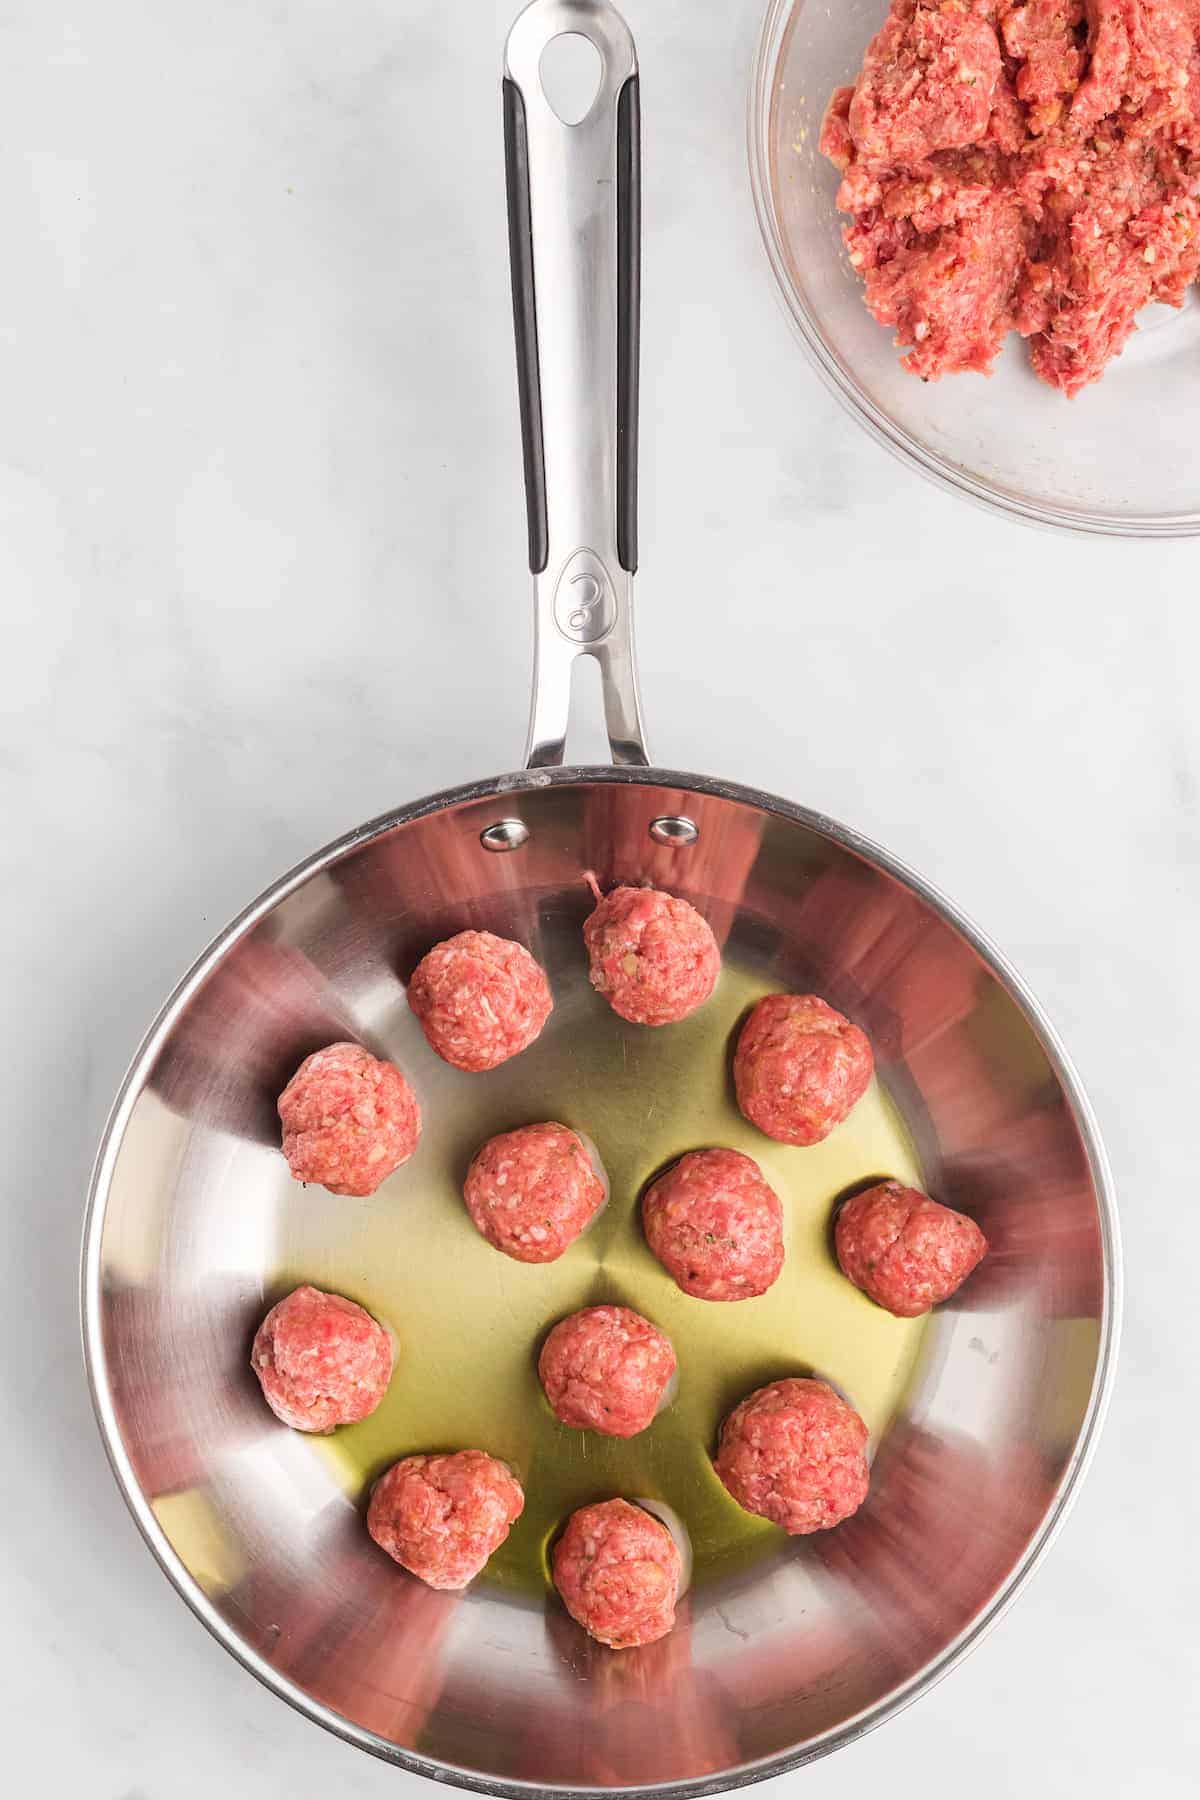 cooking the meatballs in olive oil in a fry pan